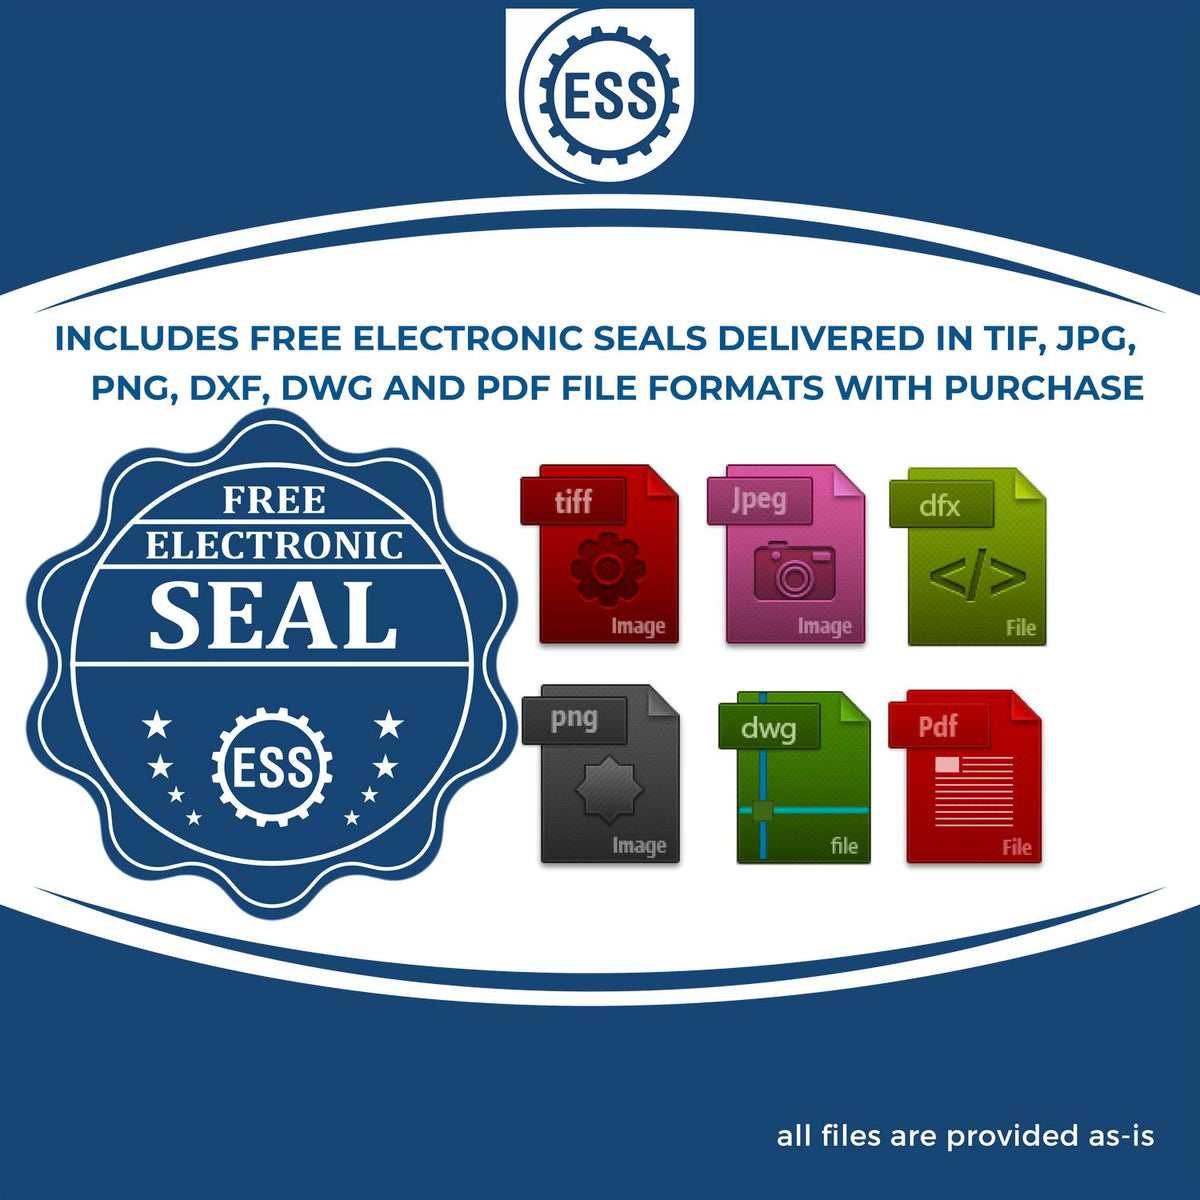 An infographic for the free electronic seal for the Heavy Duty Cast Iron Utah Engineer Seal Embosser illustrating the different file type icons such as DXF, DWG, TIF, JPG and PNG.